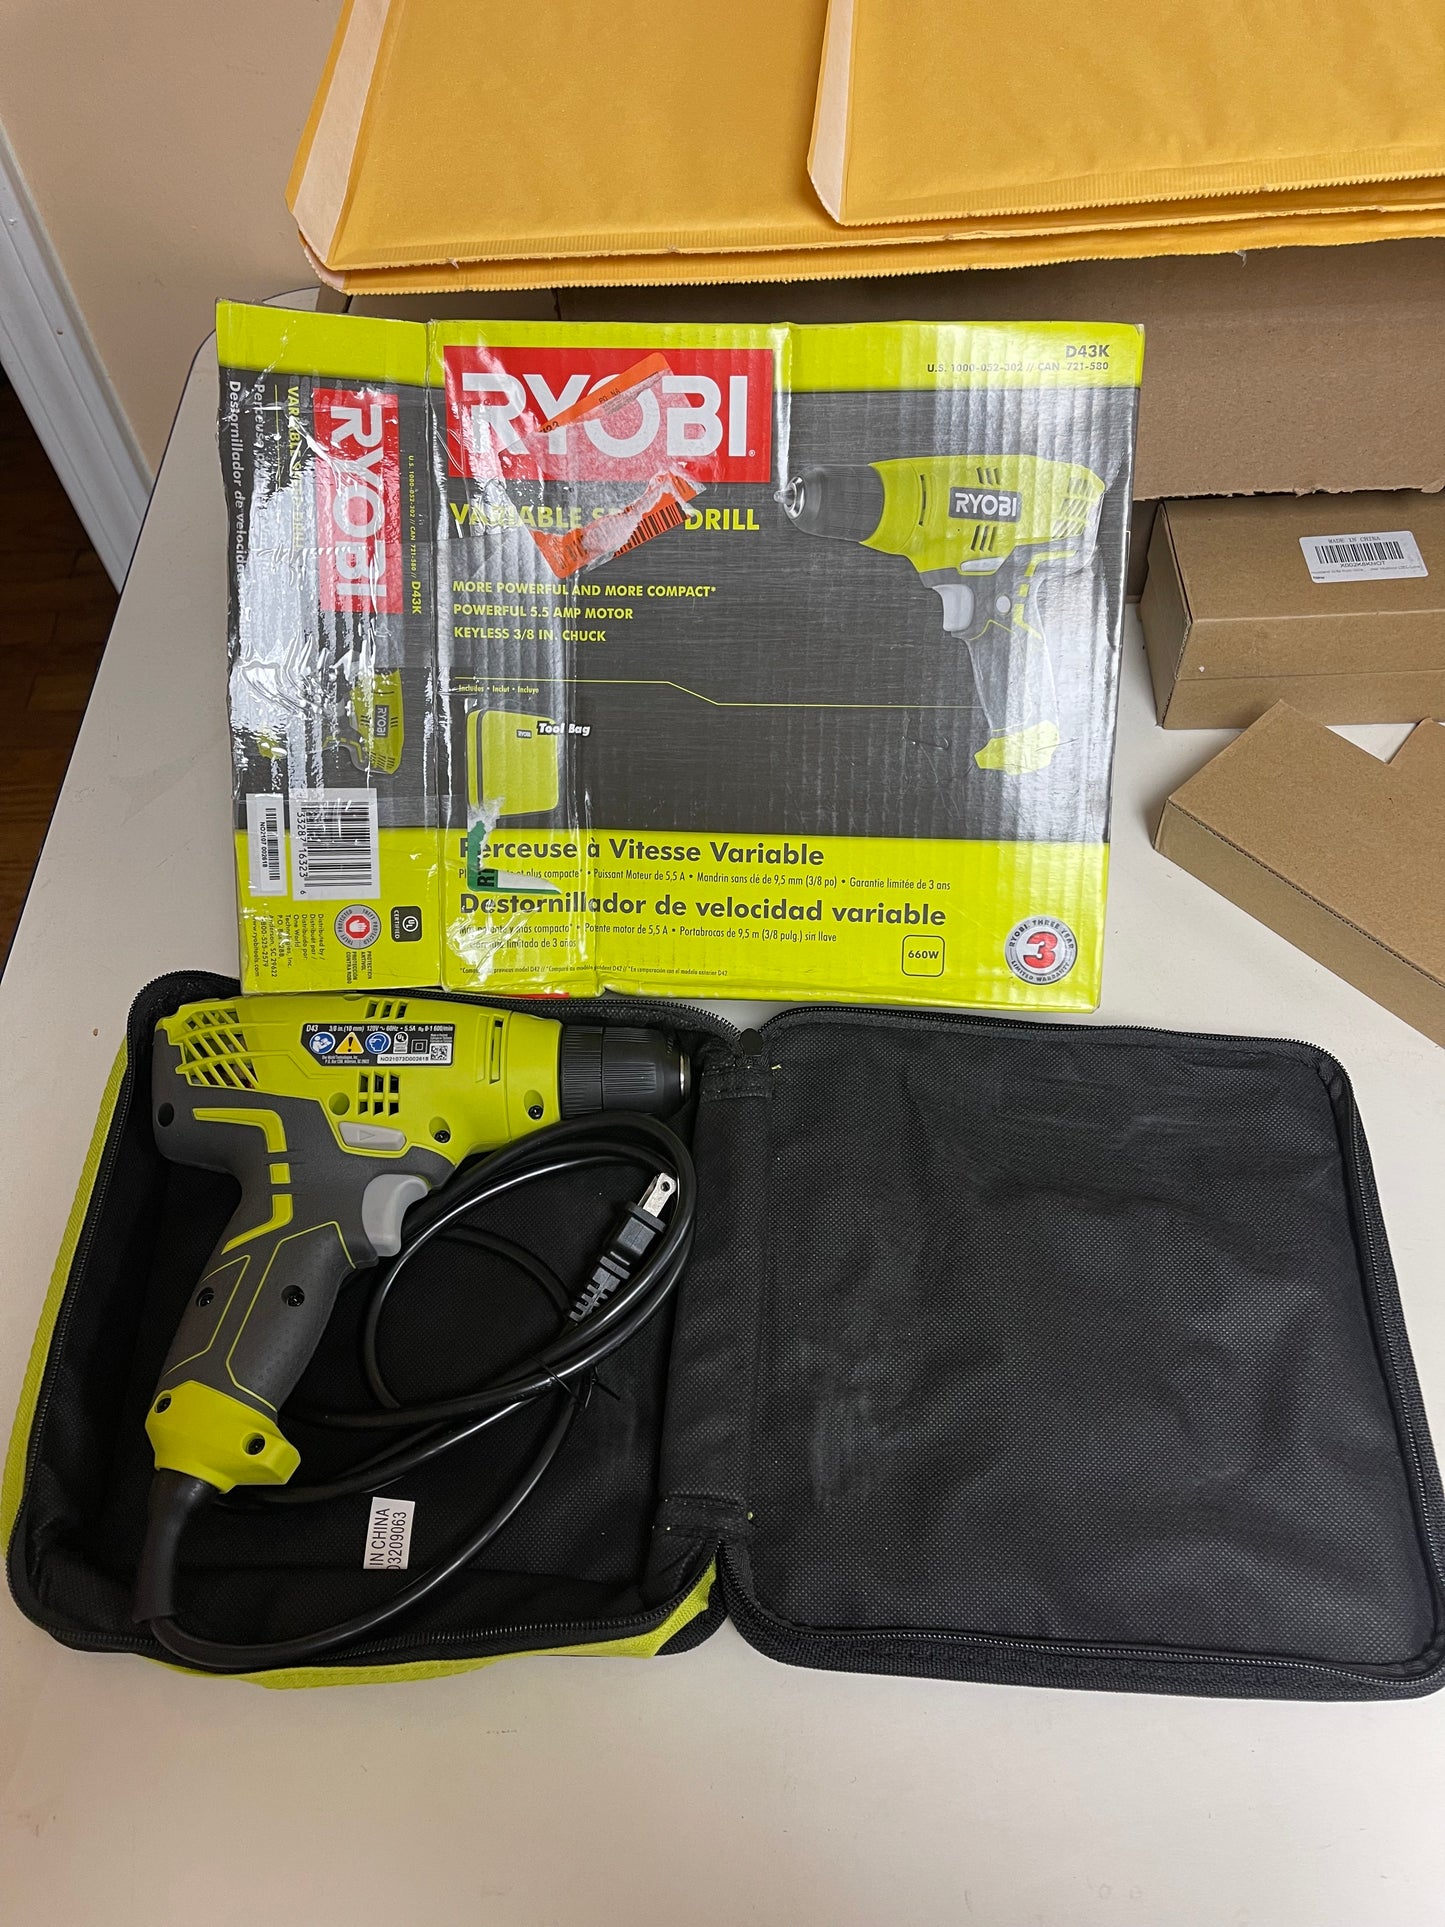 Ryobi 5.5 Amp Corded 3/8in. Variable Speed Compact Drill/Driver With Bag Damaged Box